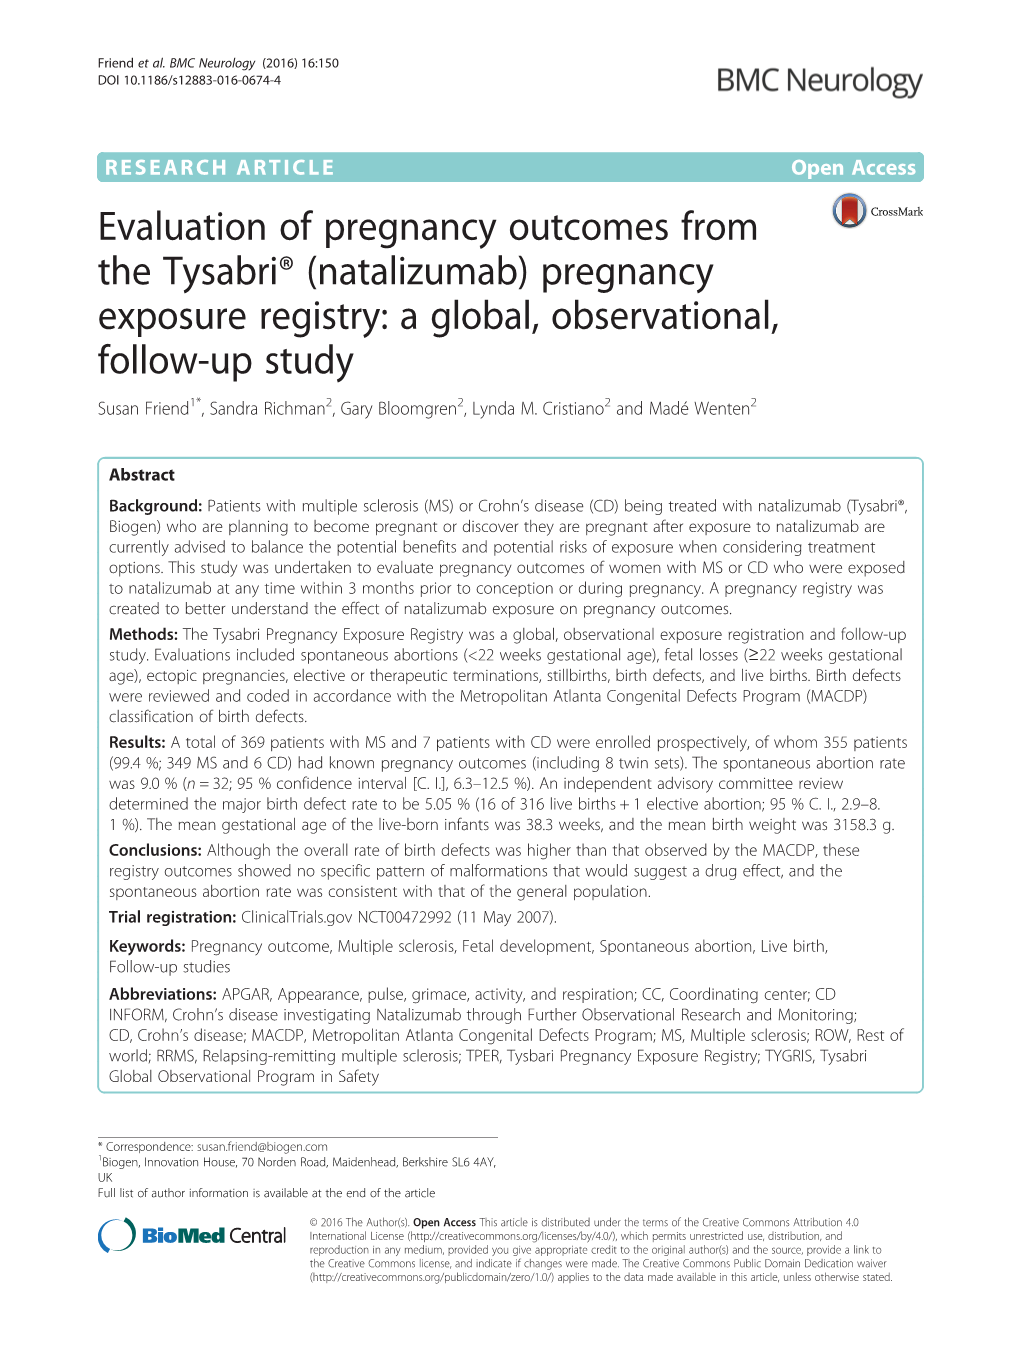 Evaluation of Pregnancy Outcomes from the Tysabri® (Natalizumab)